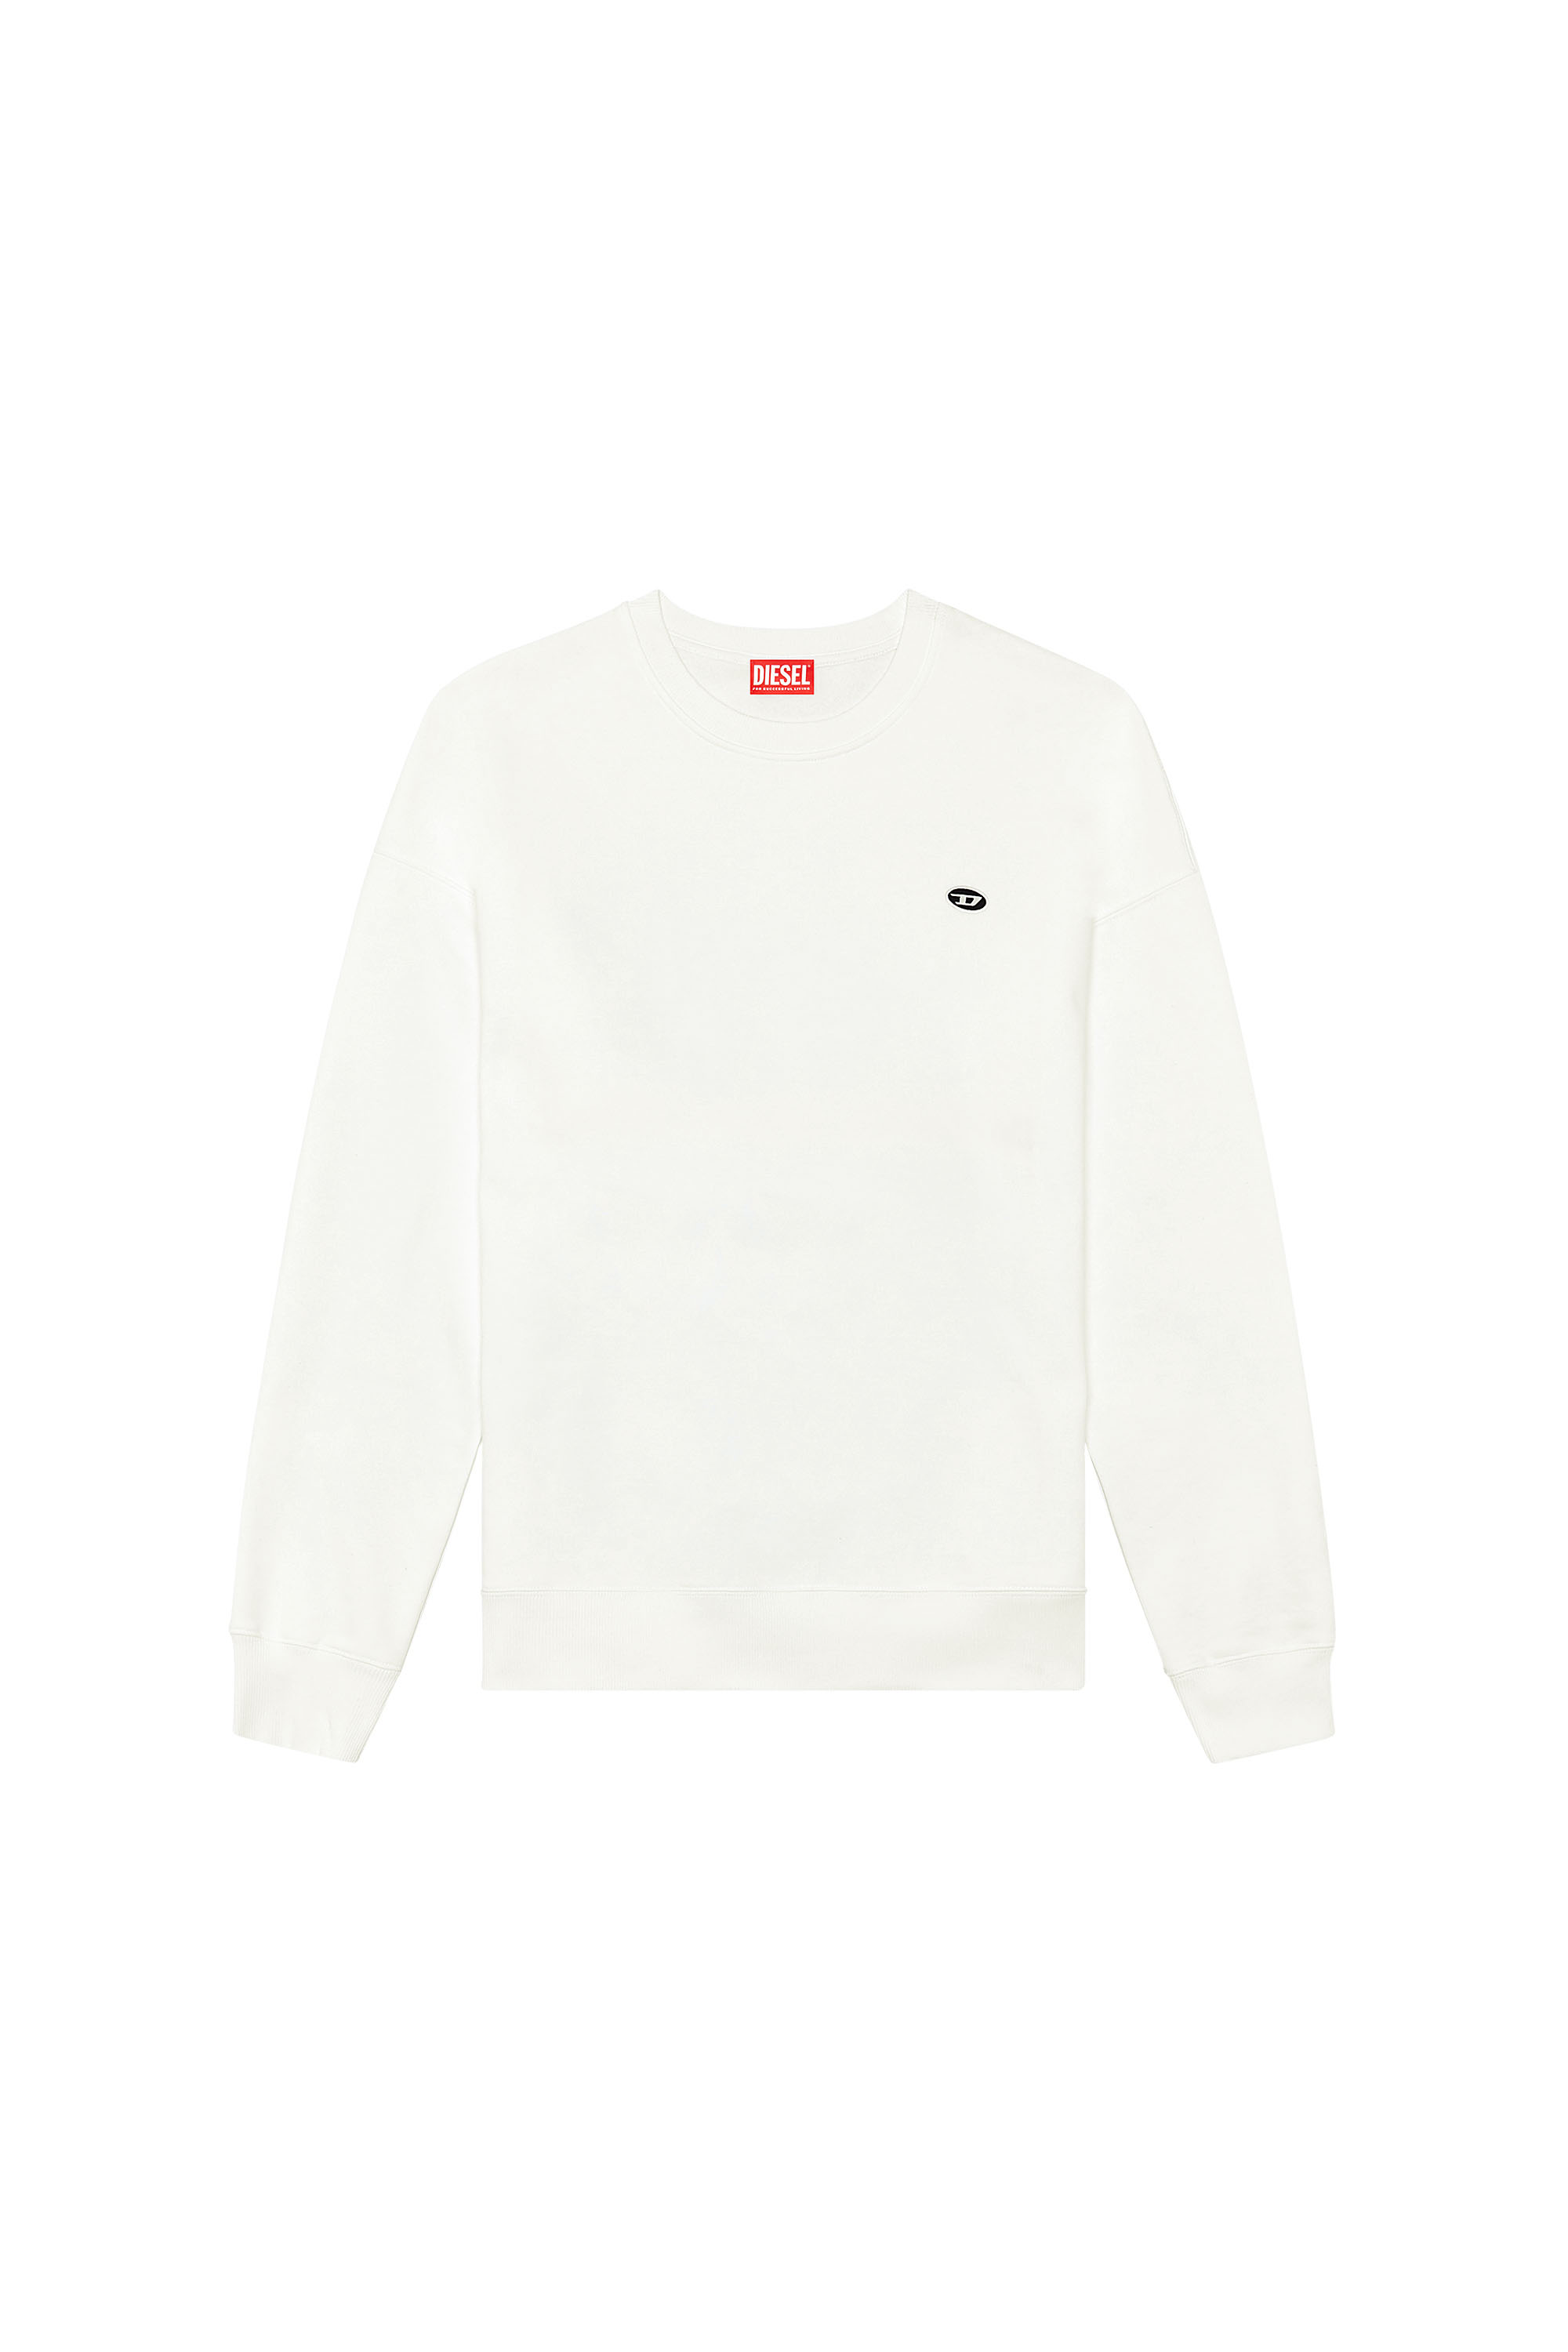 Diesel - S-ROB-DOVAL-PJ, Male Sweatshirt with oval D patch in White - Image 4